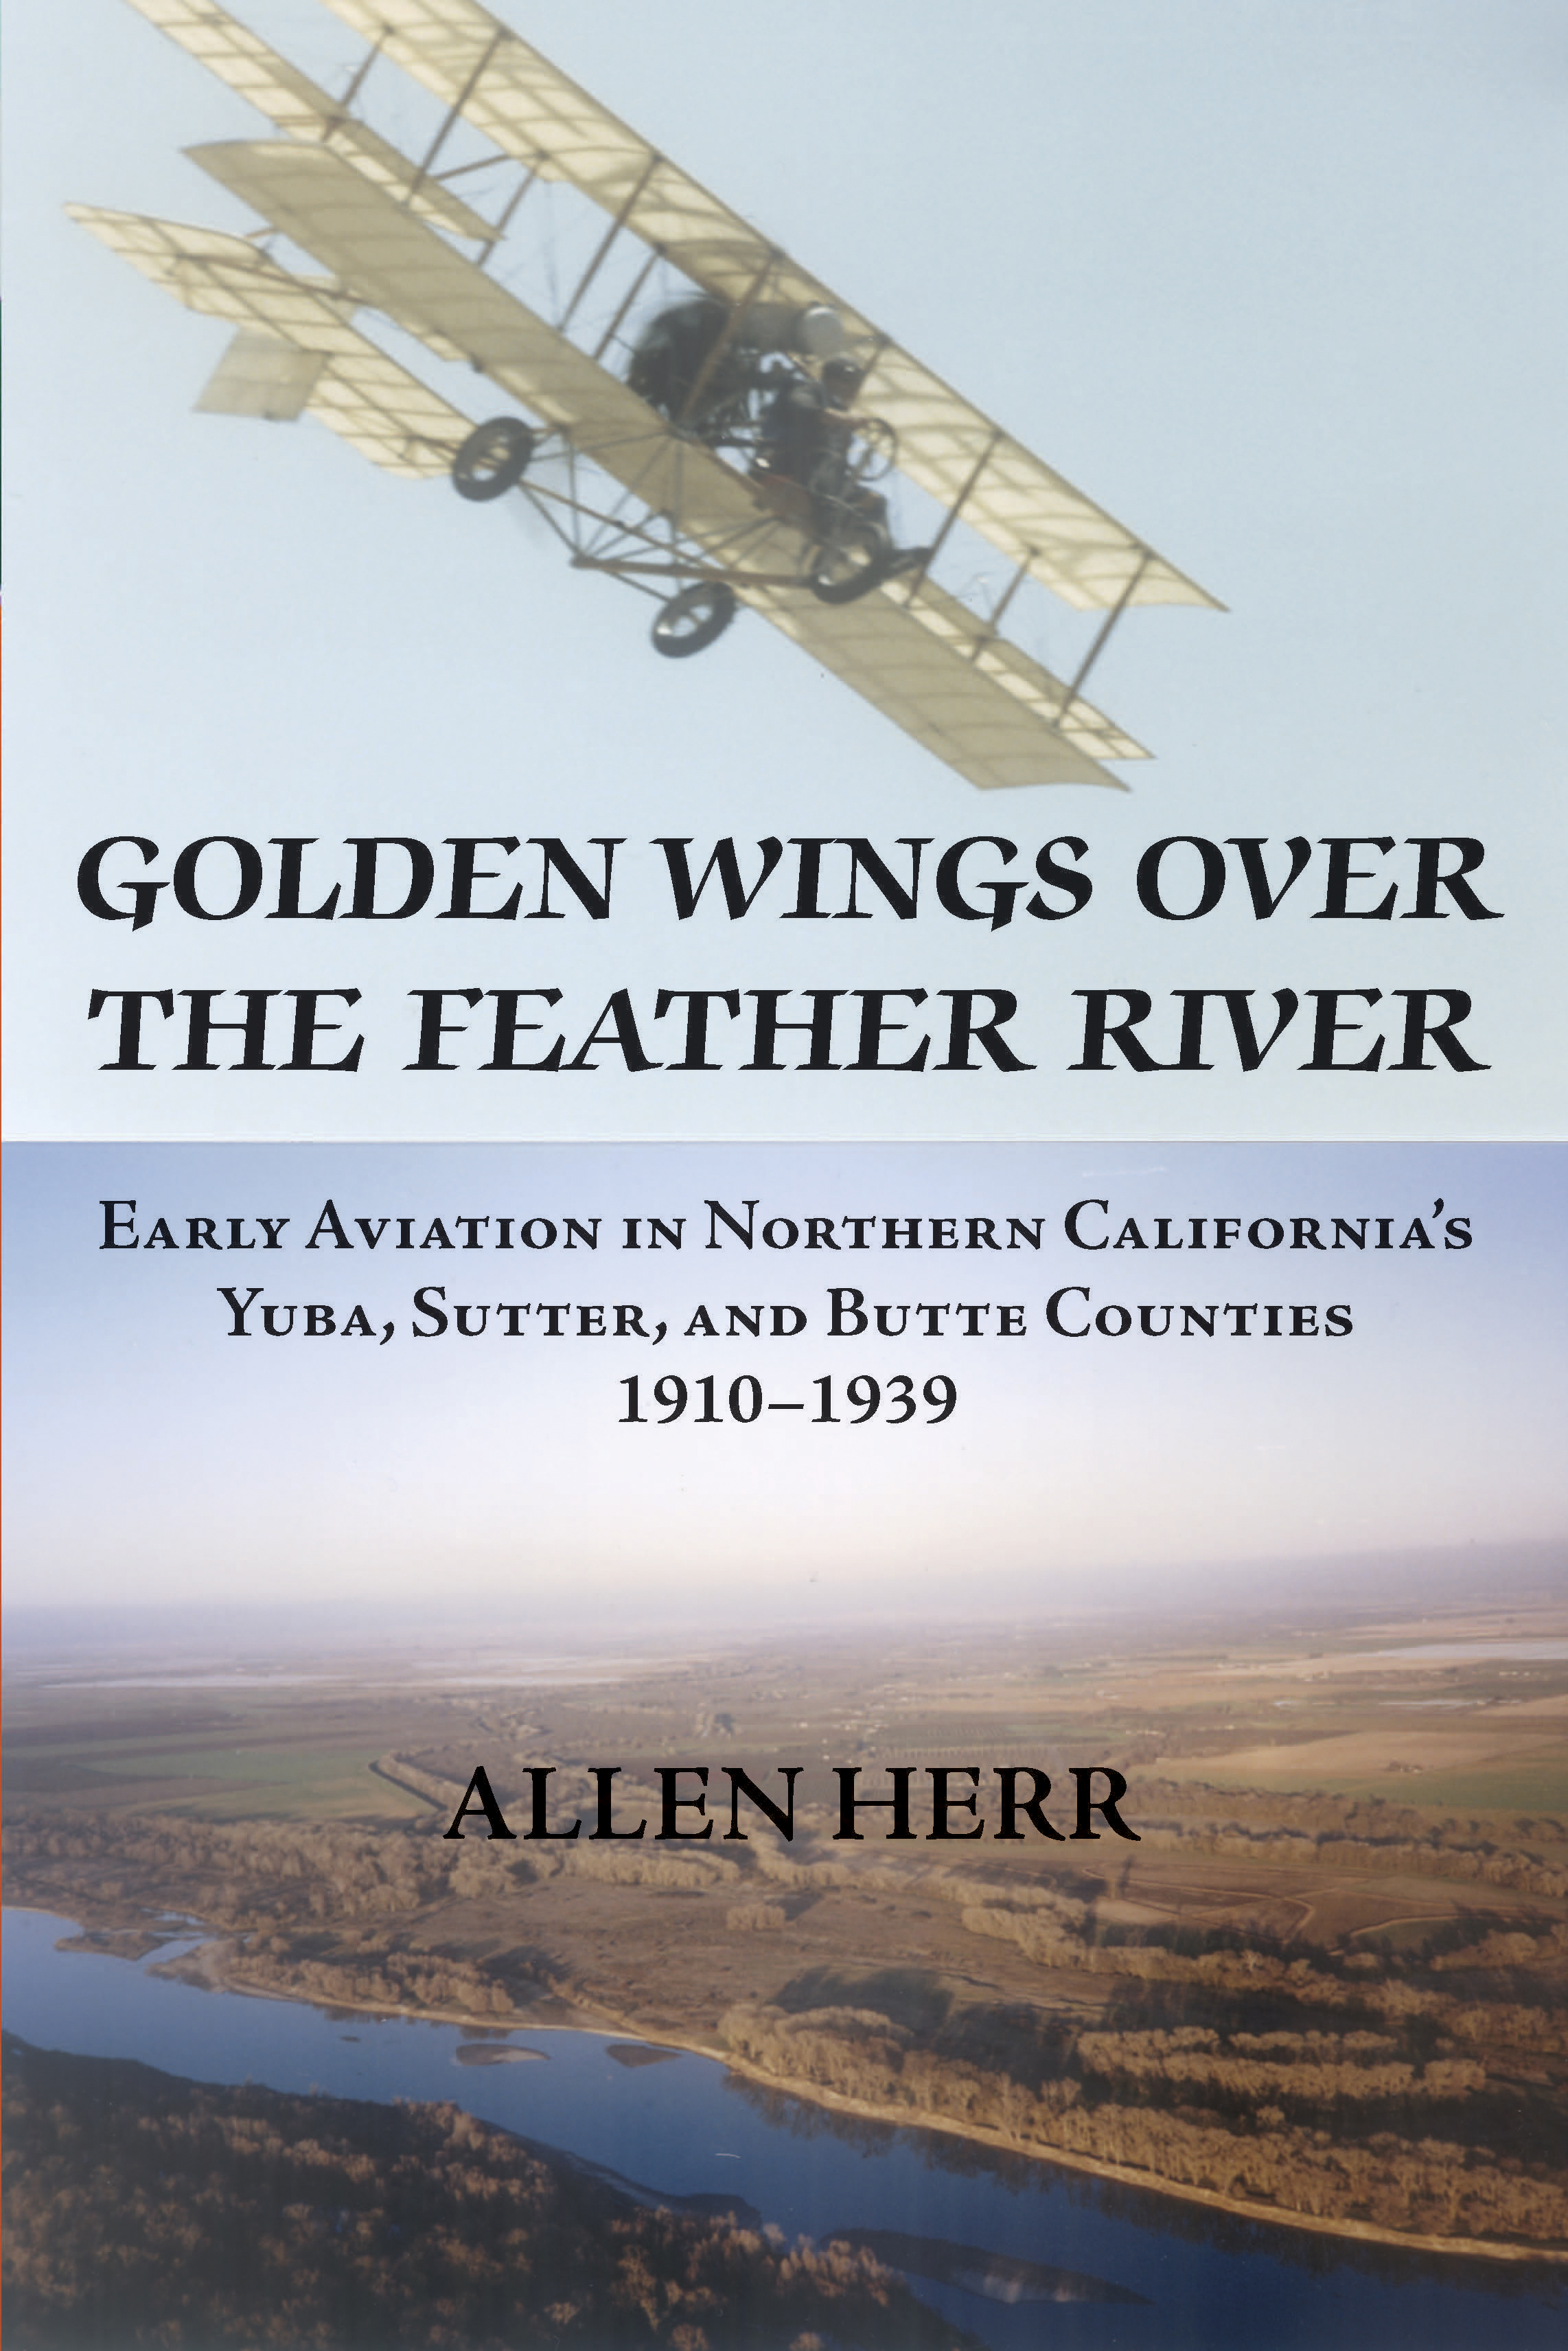 Golden Wings over the Feather River by Allen Herr